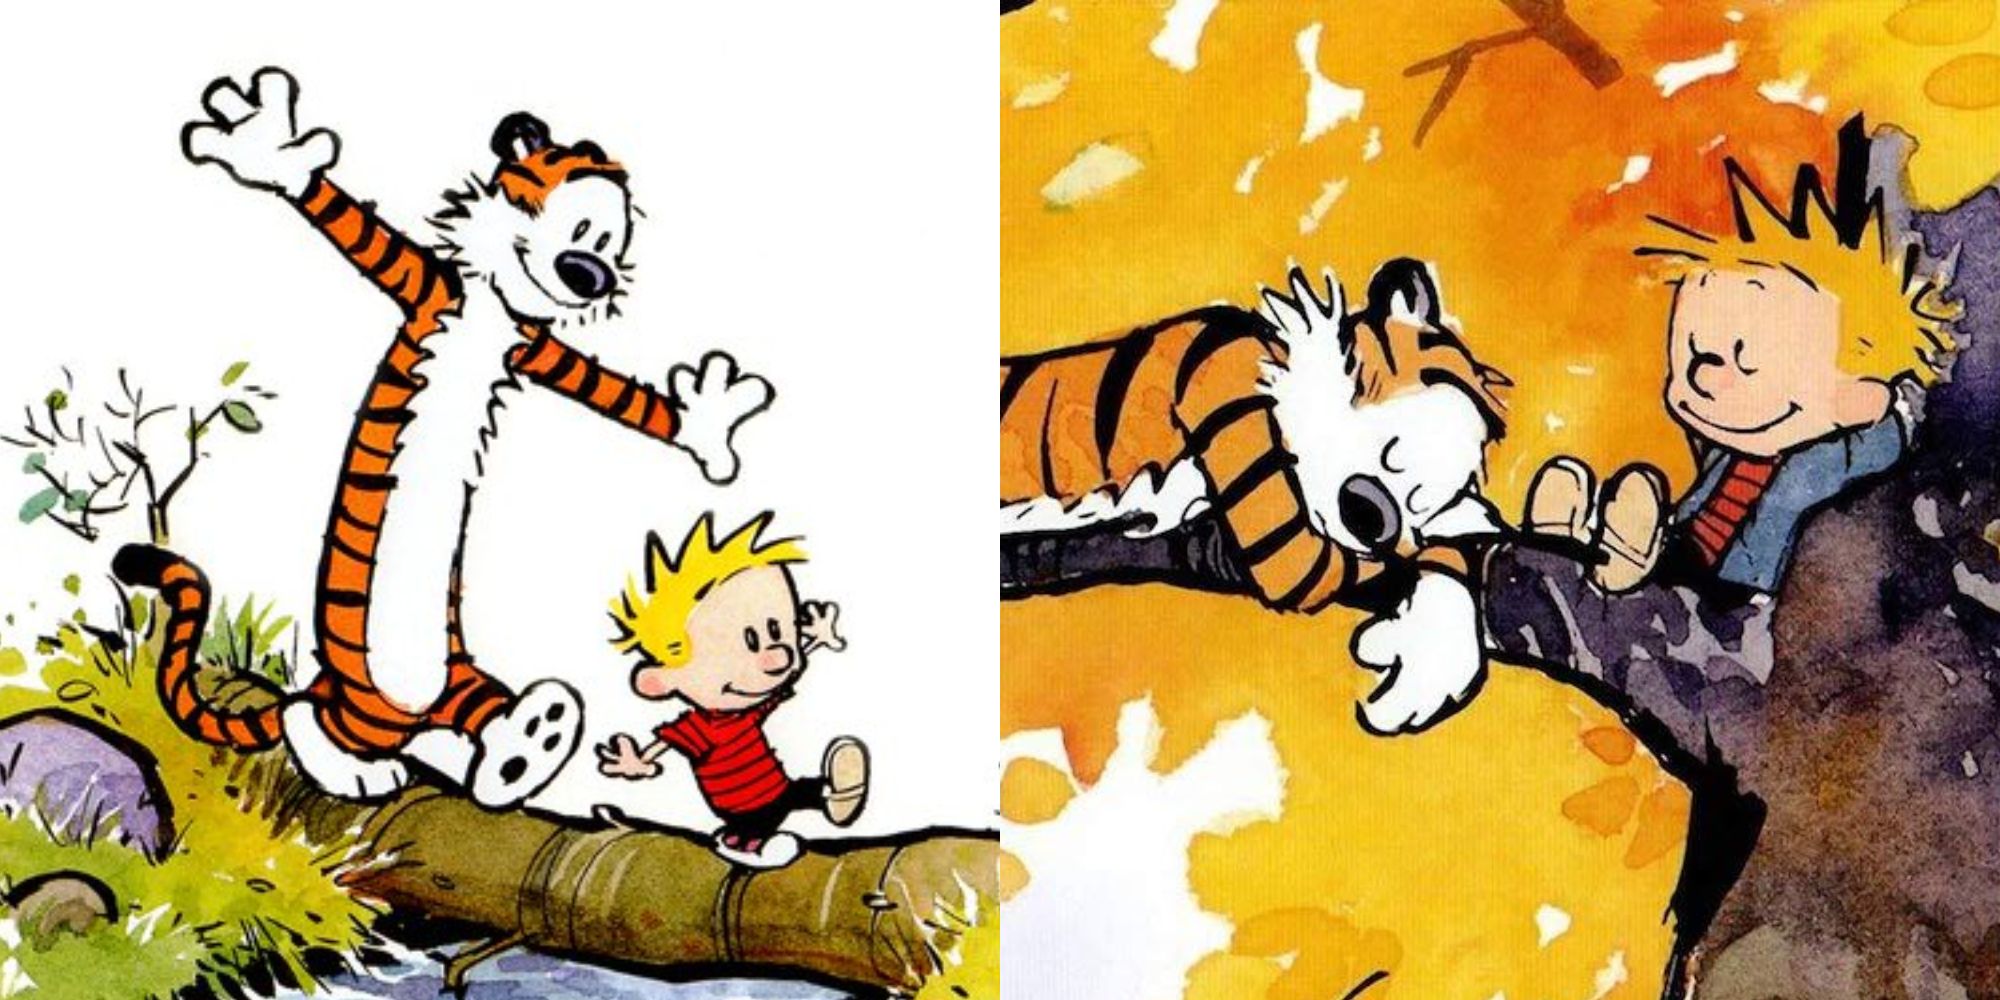 Two illustrations of Calvin and Hobbes from the classic comics